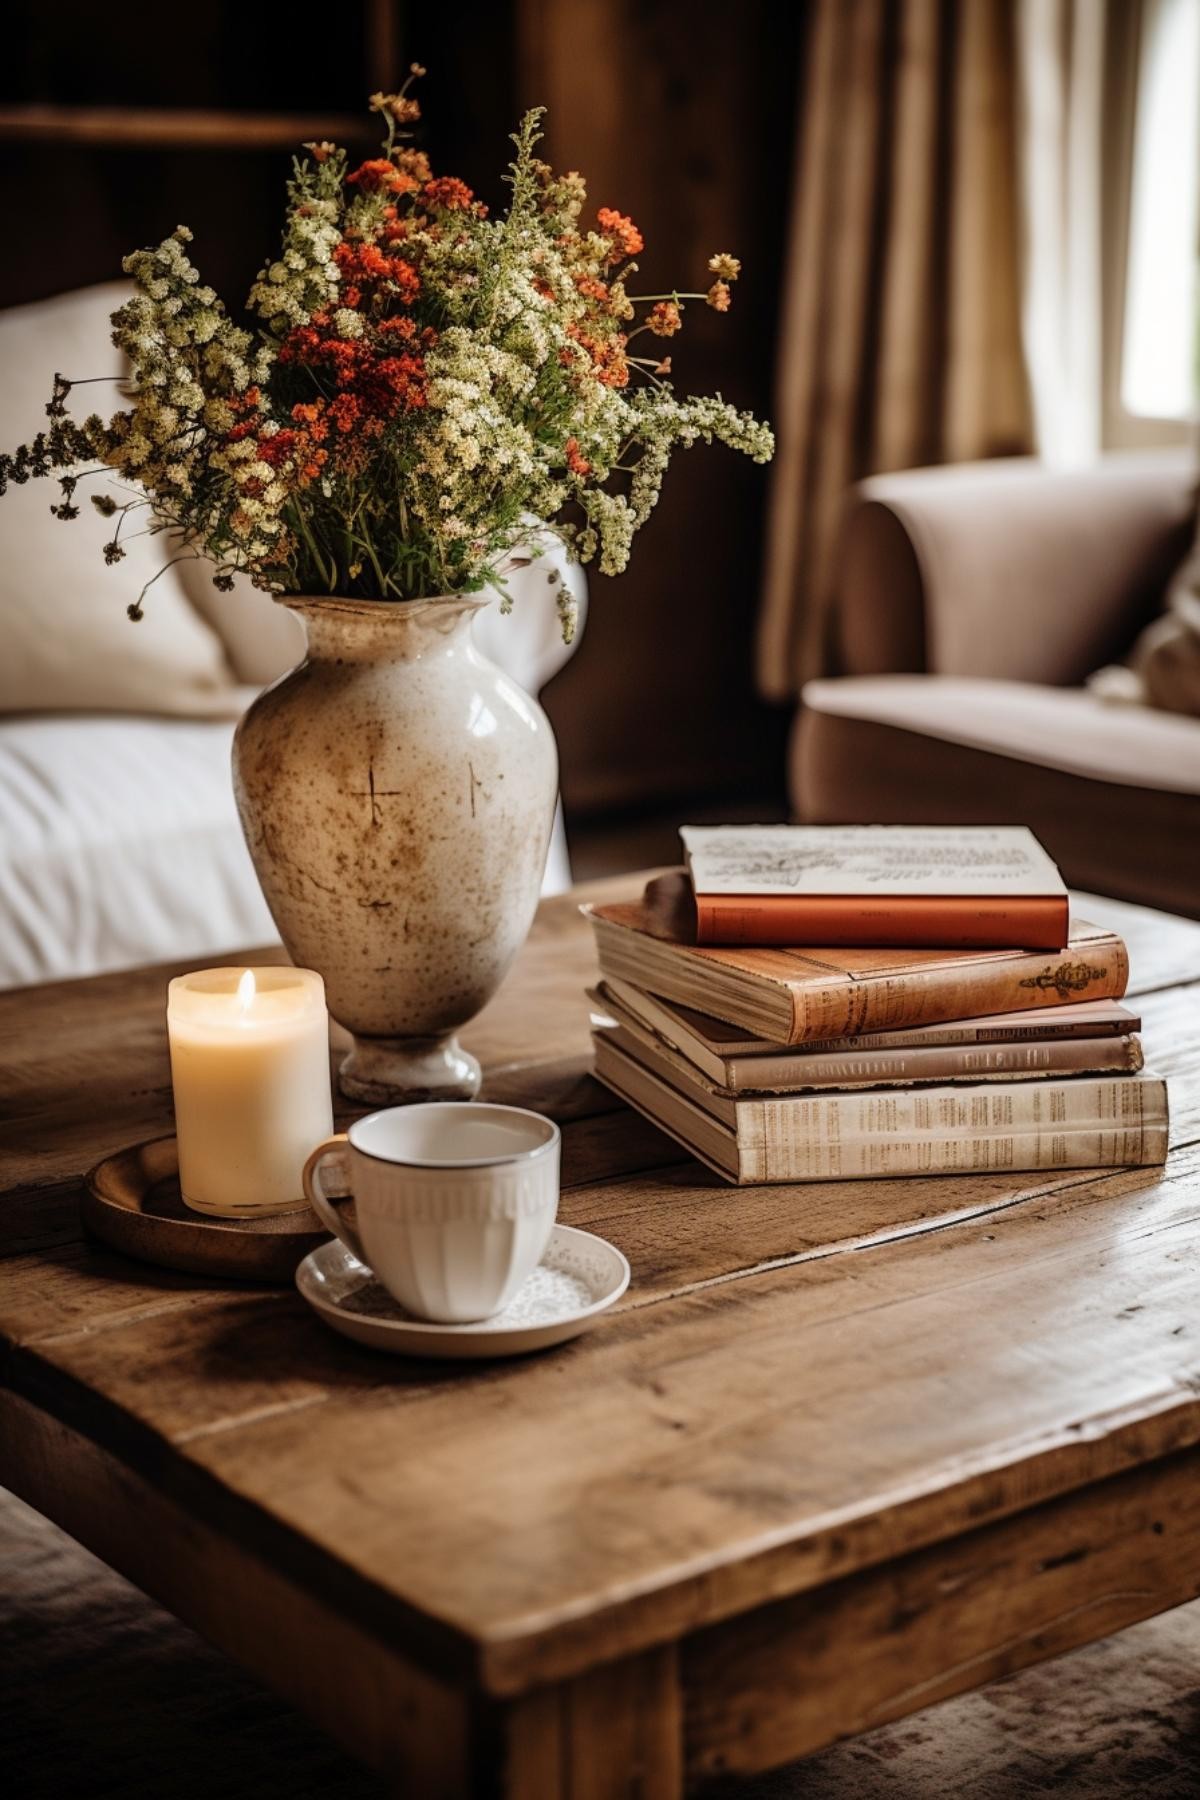 Flowers and Books